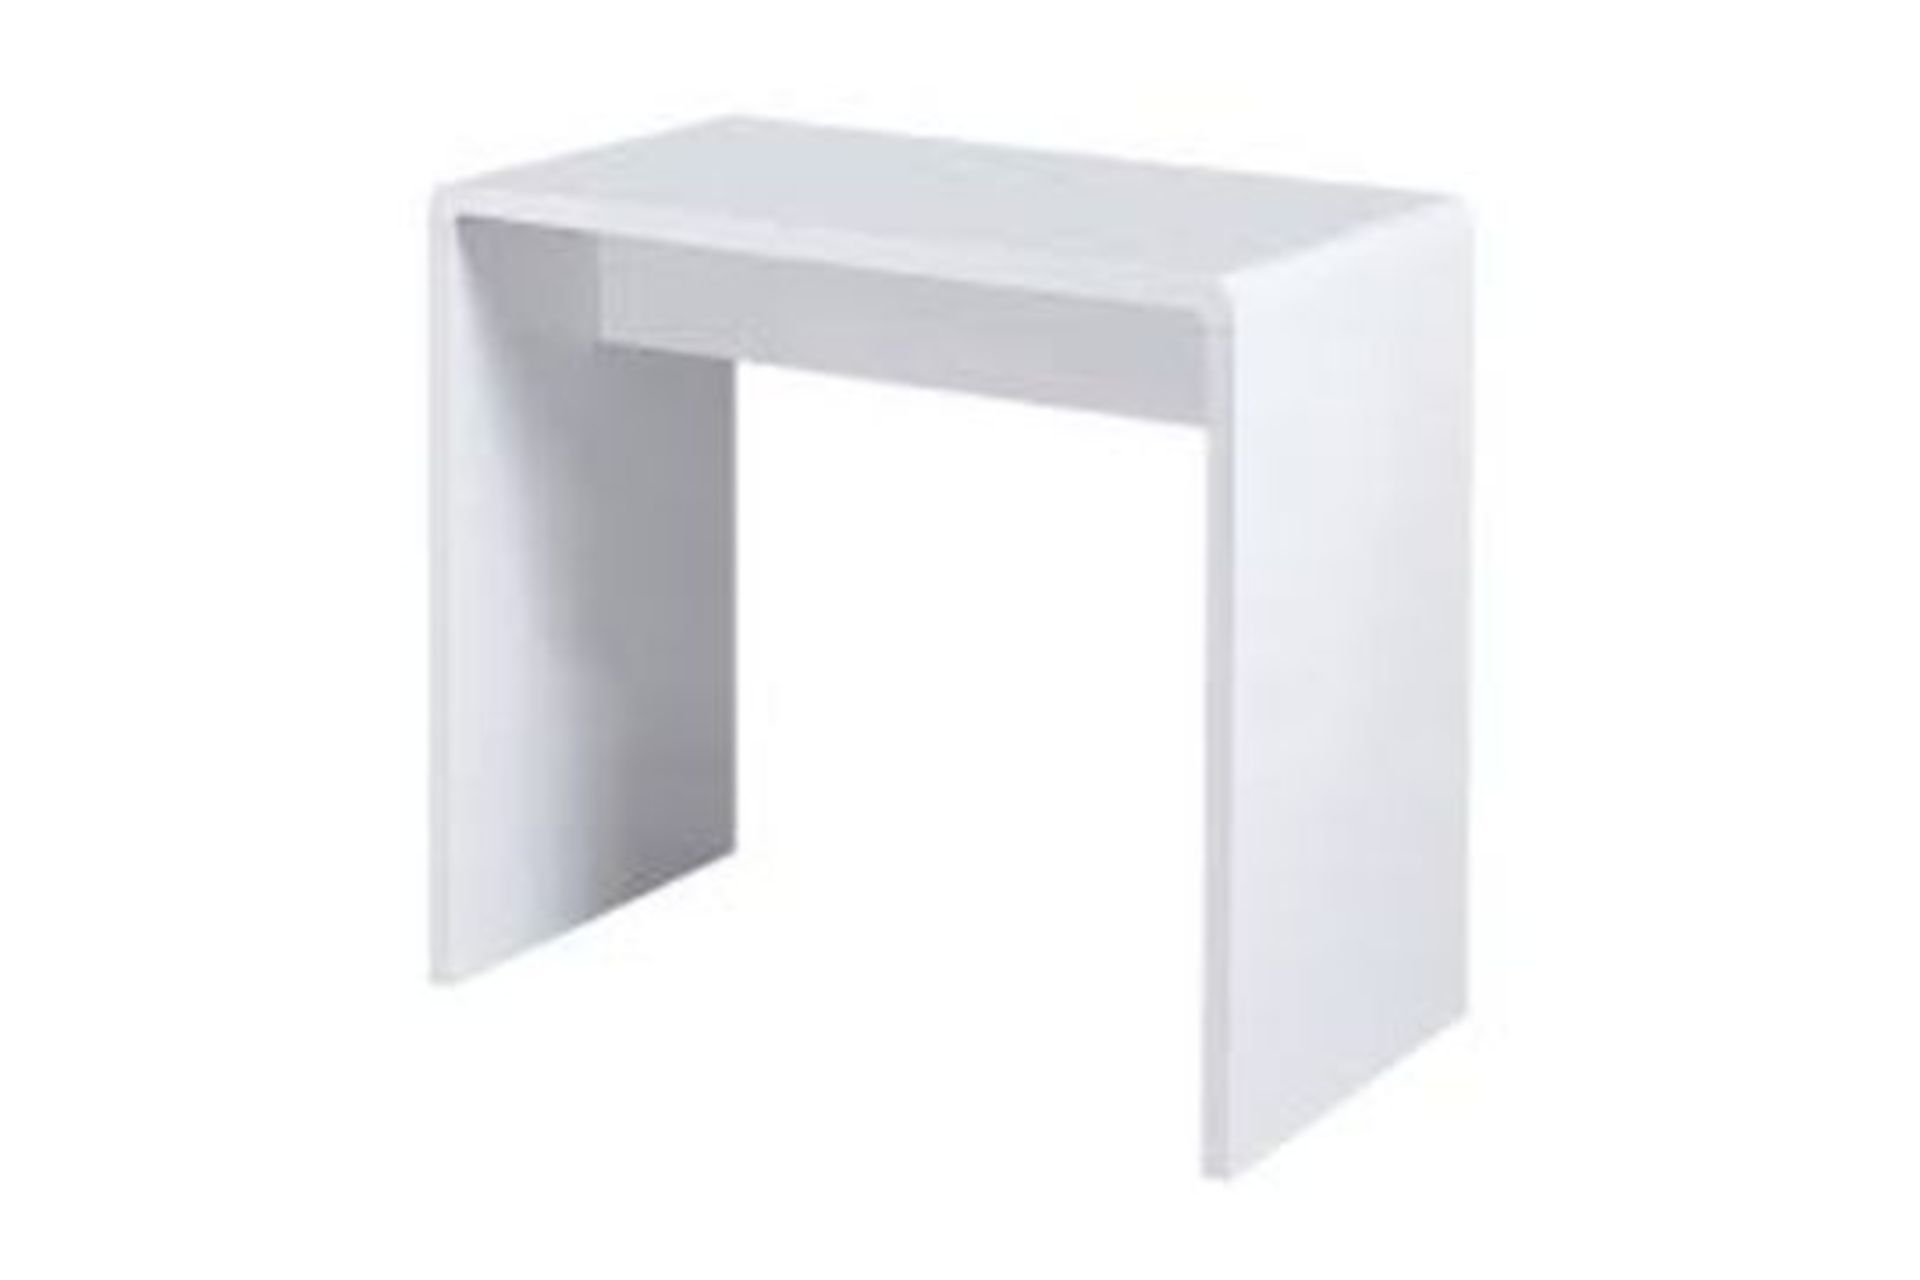 Boxed Glacier White Gloss 120X170X110CM Rectangular Bar Table RRP £250 (Pictures Are For